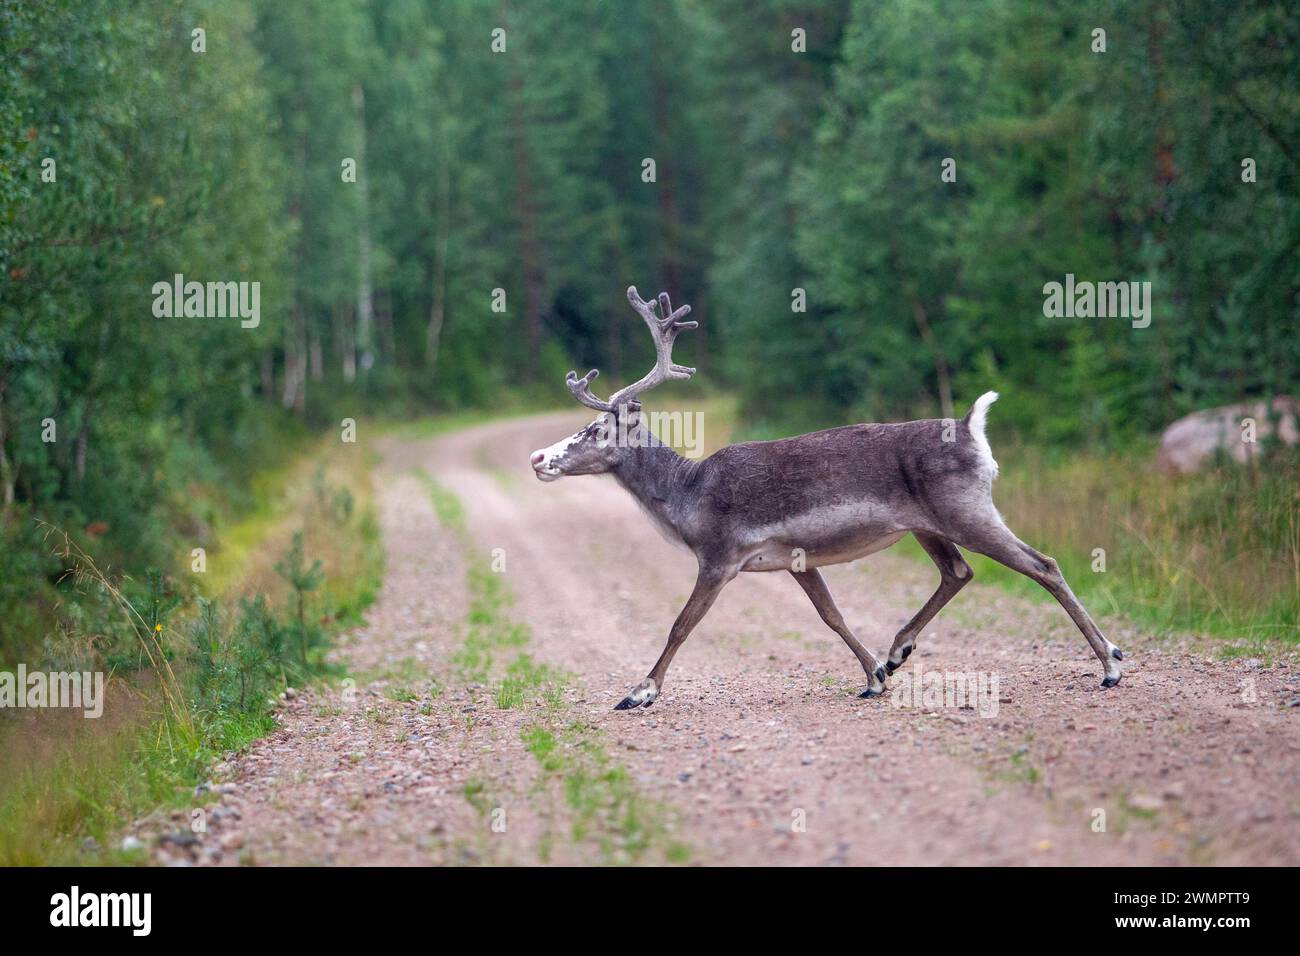 reindeer in the forest on the road in the summer. Stock Photo